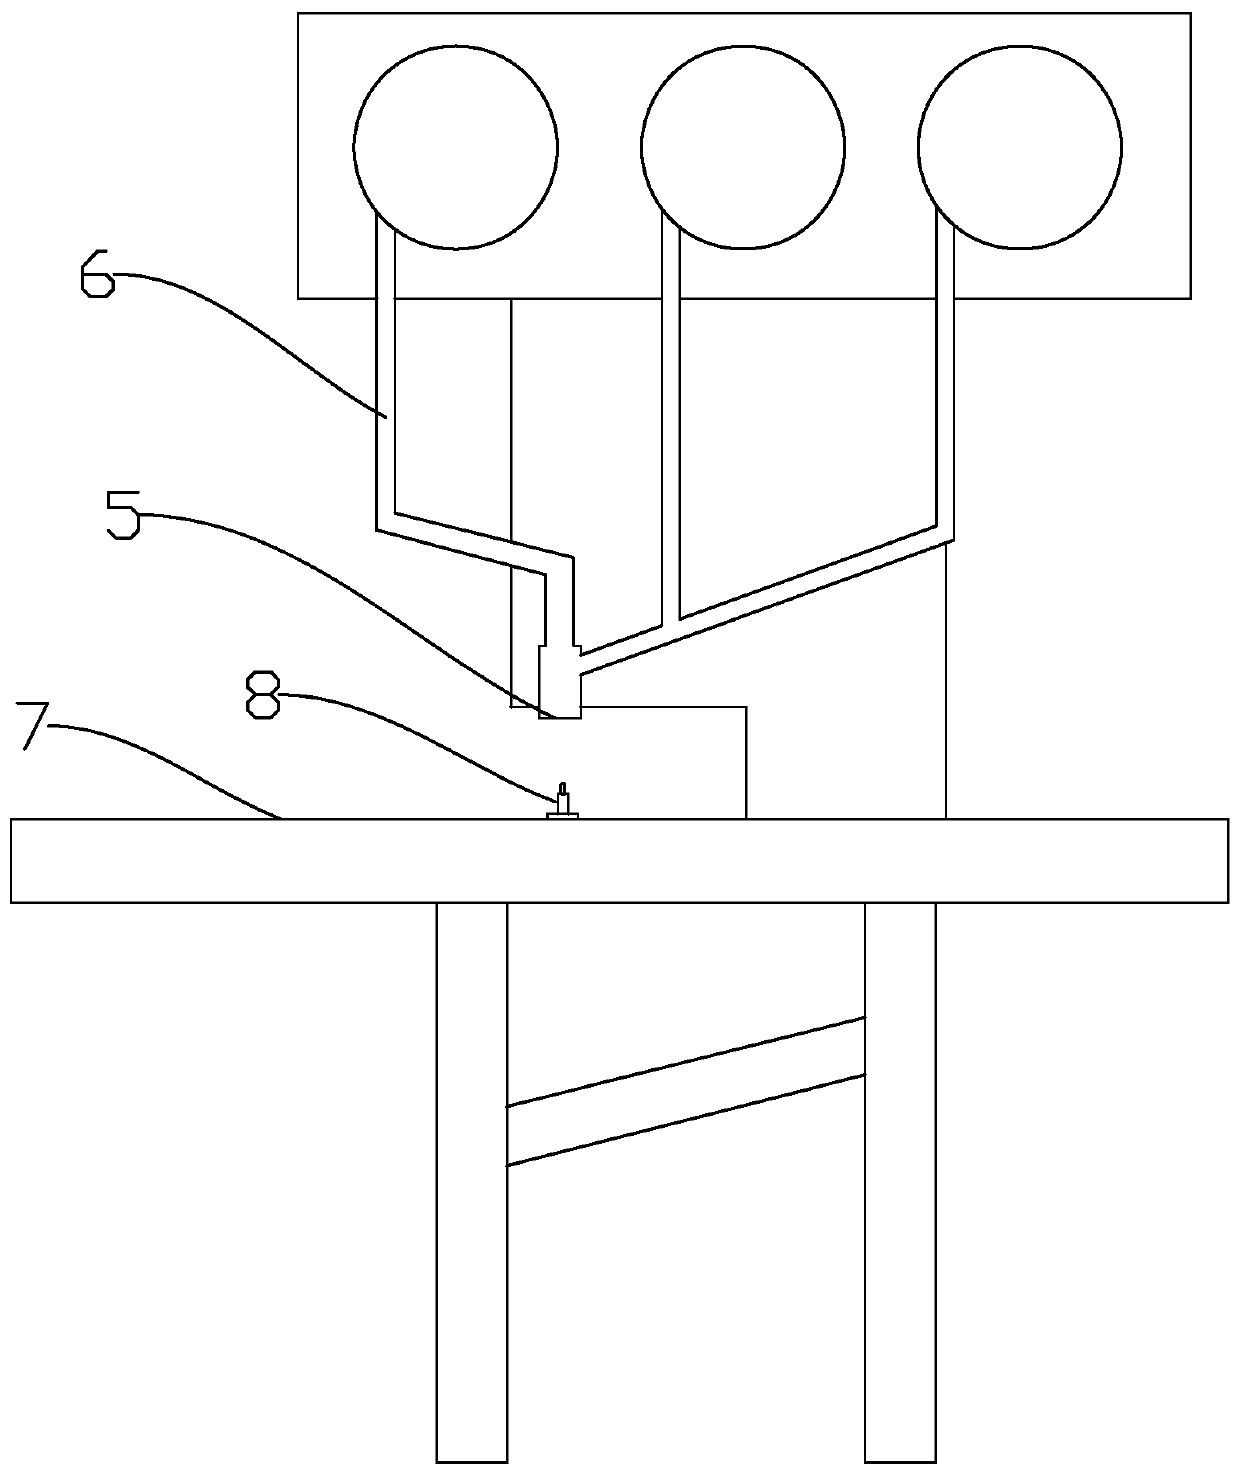 Production process of stretching device